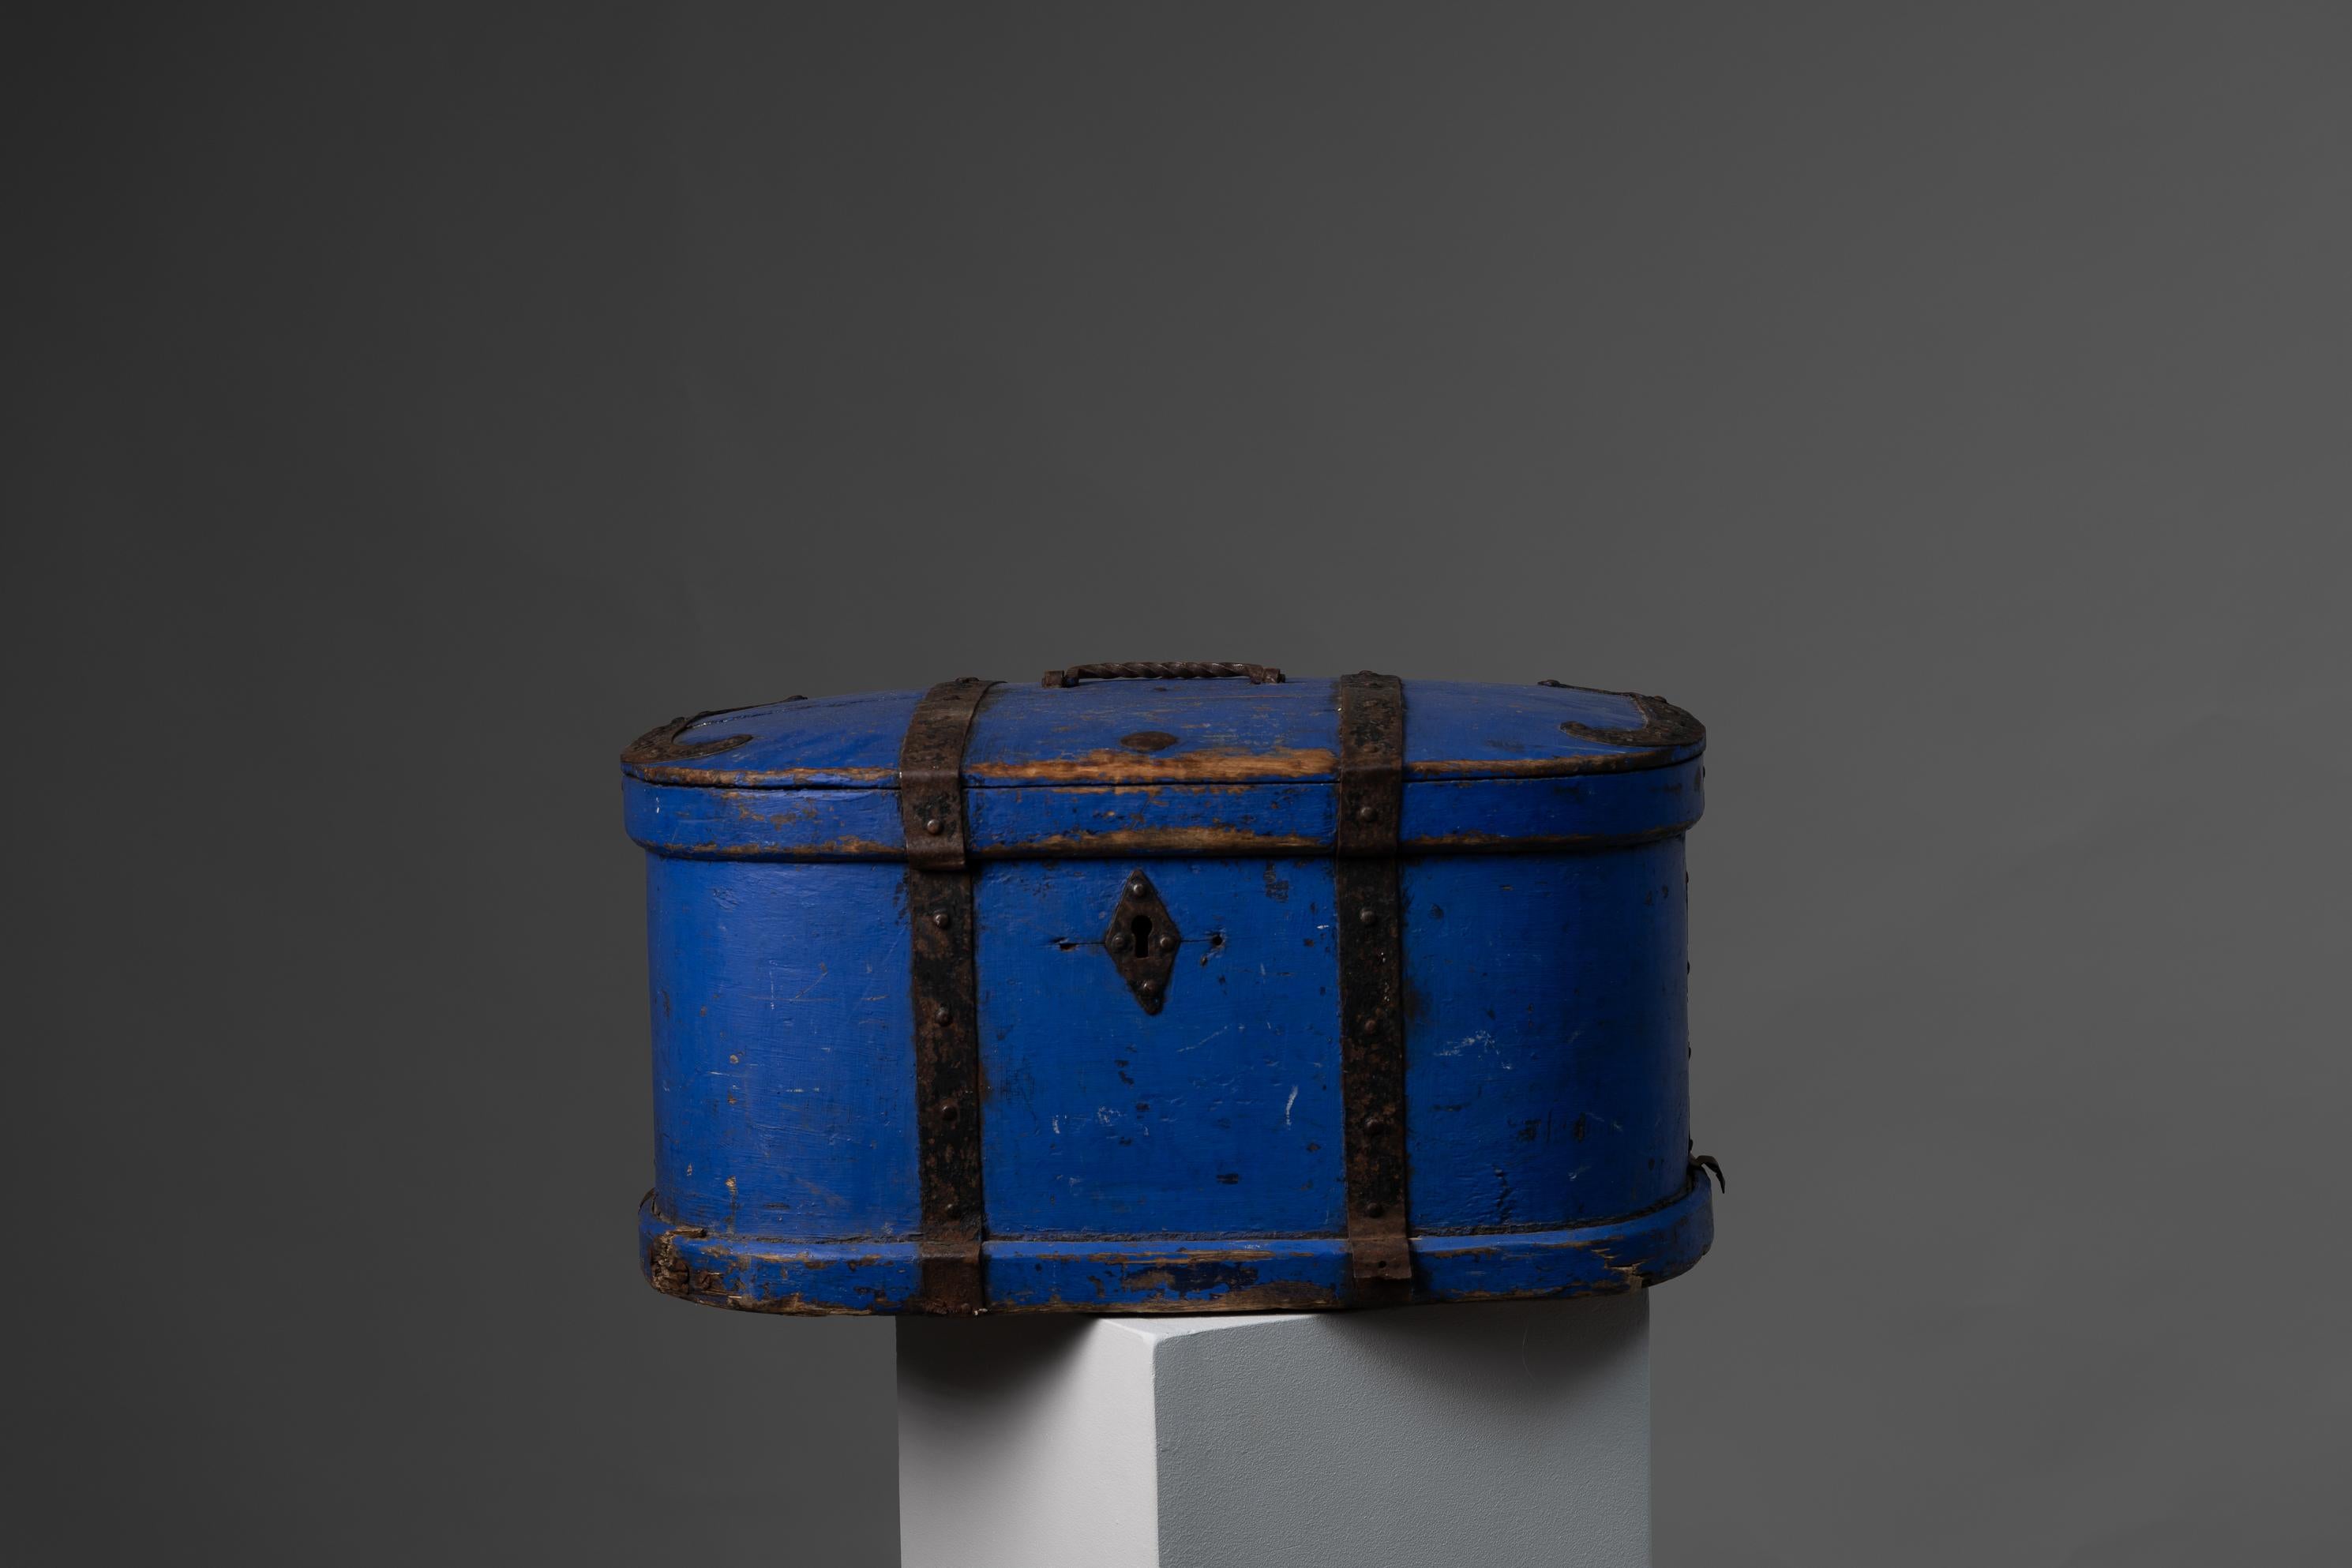 Swedish hand-made antique blue traveling box from the 1820s to 1830. This charming little box has bright blue original paint and hand wrought hardware in iron. The box was used to storage valuables when travelling, hence the sturdy iron hardware. It